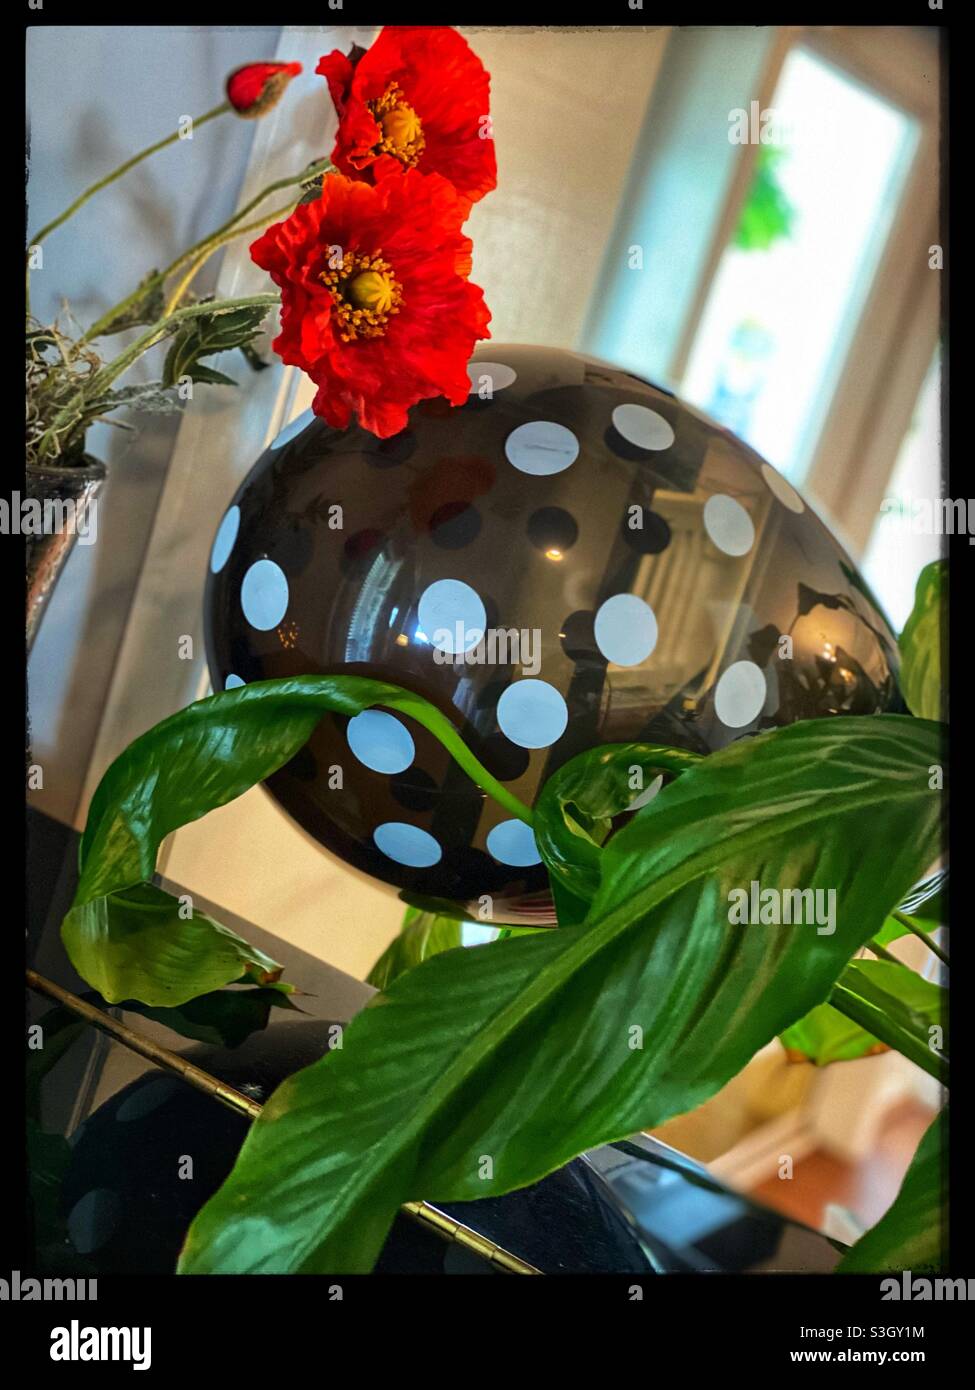 Polkadot balloon between flowers and a plant Stock Photo